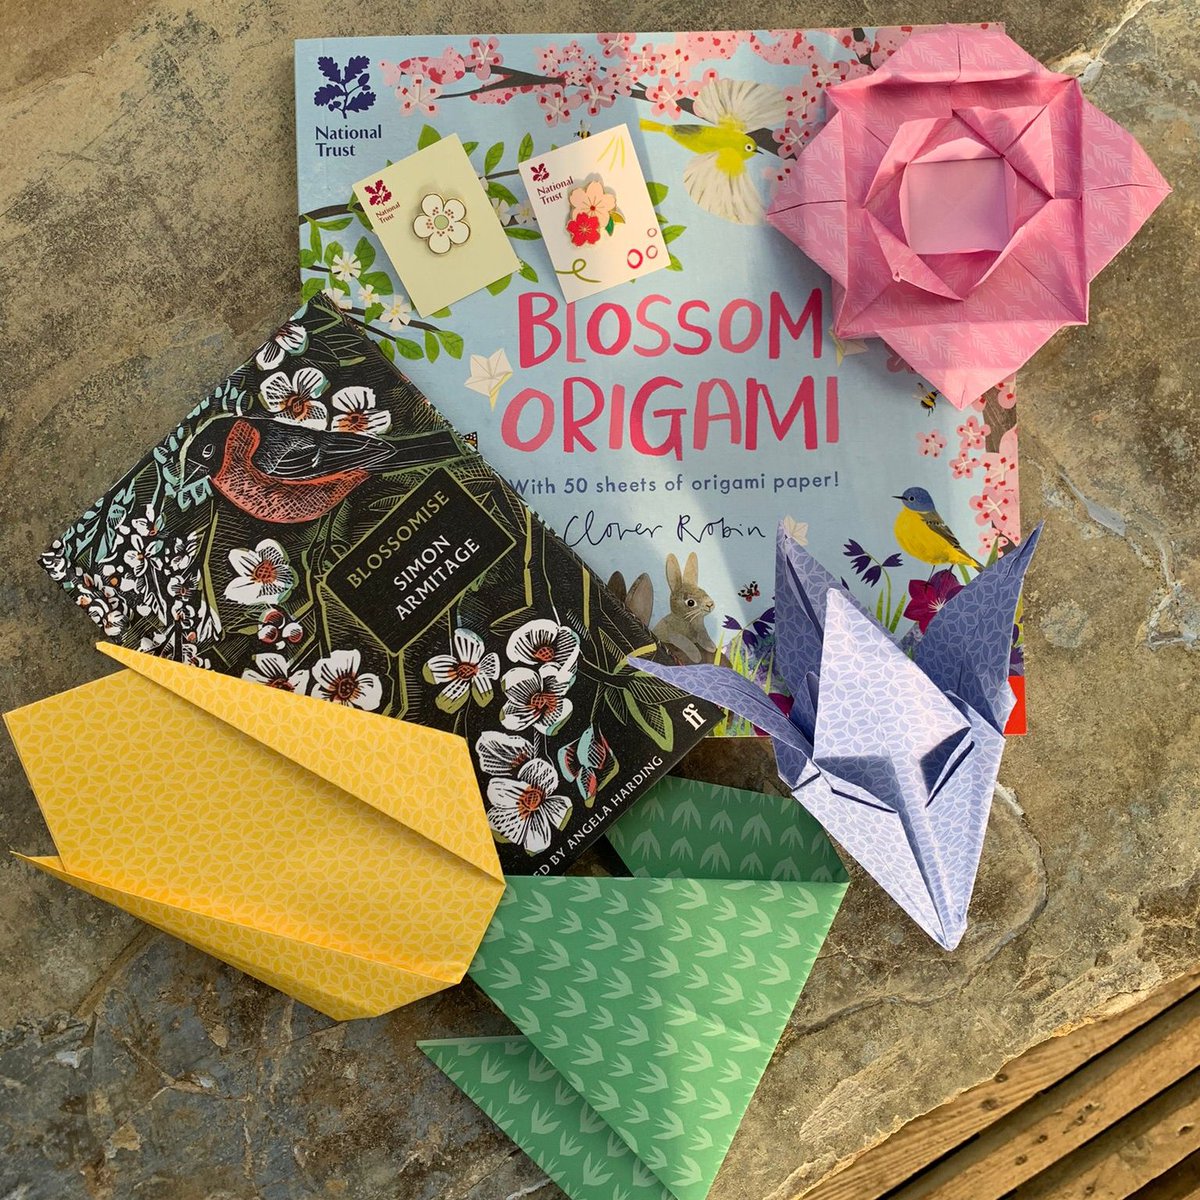 The Blossom Origami book is also available in the bookshop at Knole, along with other activity and craft books to keep everyone occupied over the Easter holidays. #sevenoaks #bookshops #nationaltrustshops #BlossomWatch #origami ©National Trust/Ellie Brooks-Harding